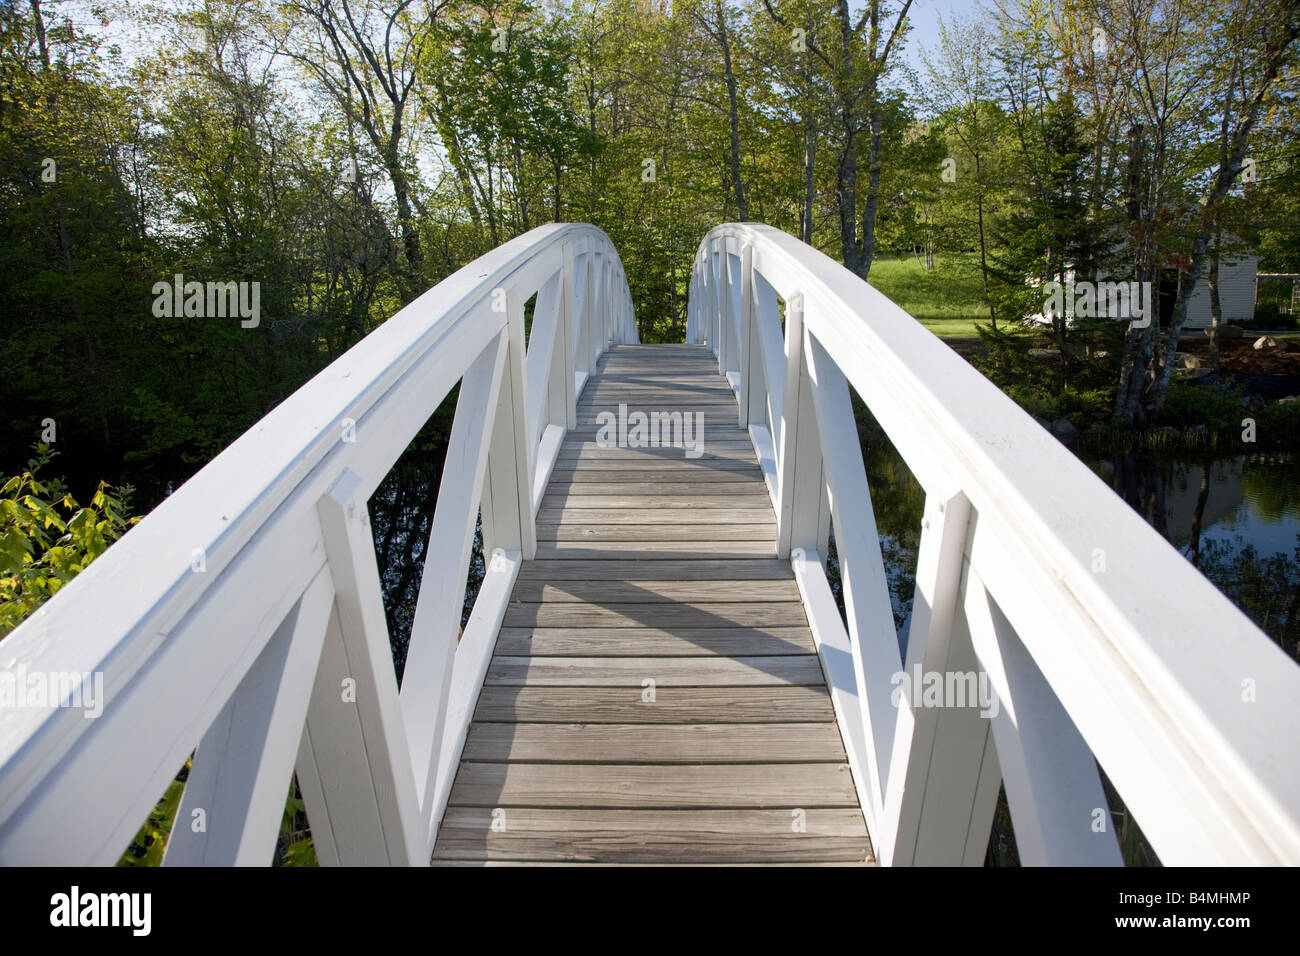 Wooden foot bridge over a pond Somesville ME Stock Photo